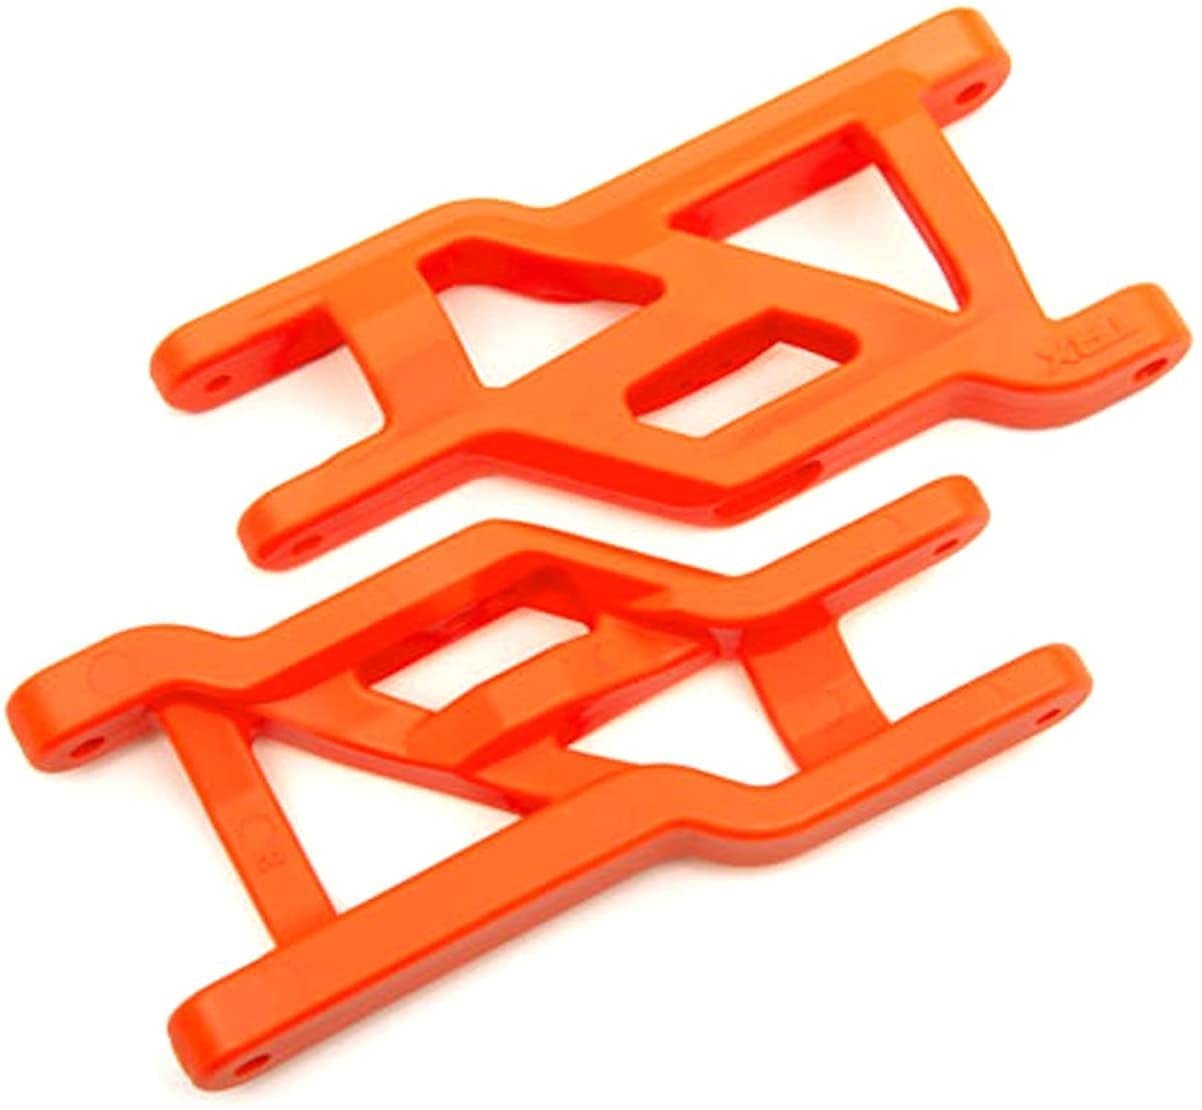 Traxxas 3631T Suspension Arms Front Orange 2 heavy duty cold weather Material